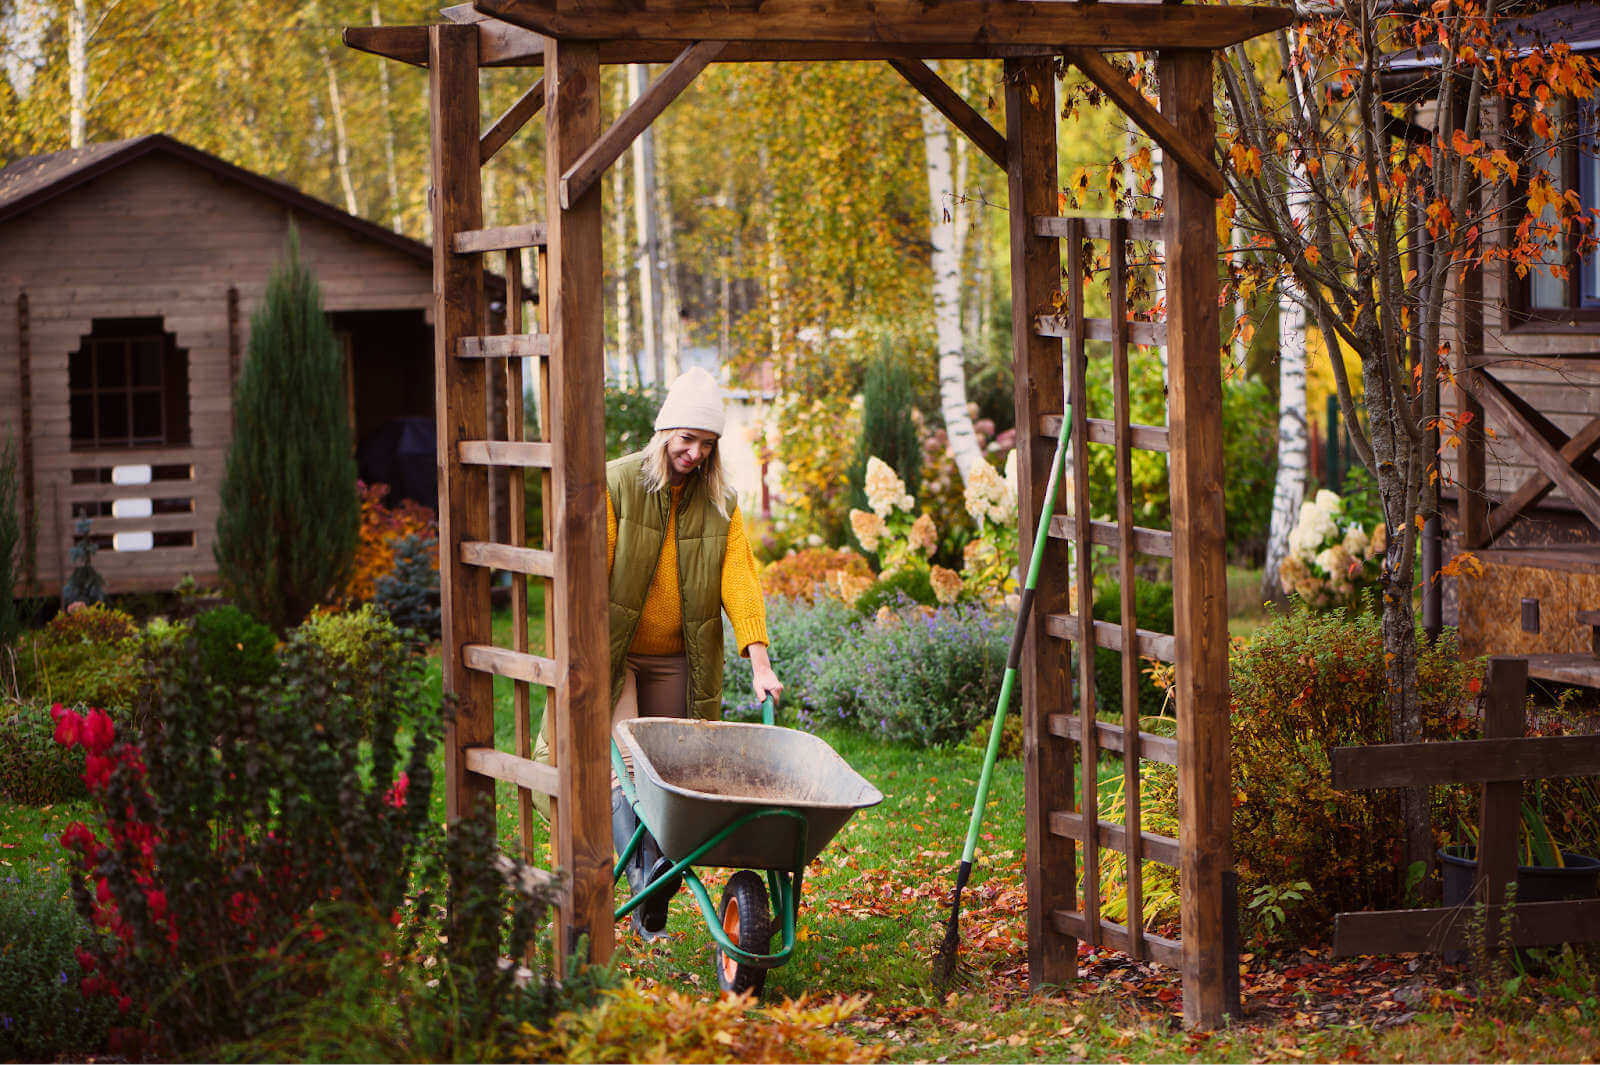 A woman landscaping in fall.